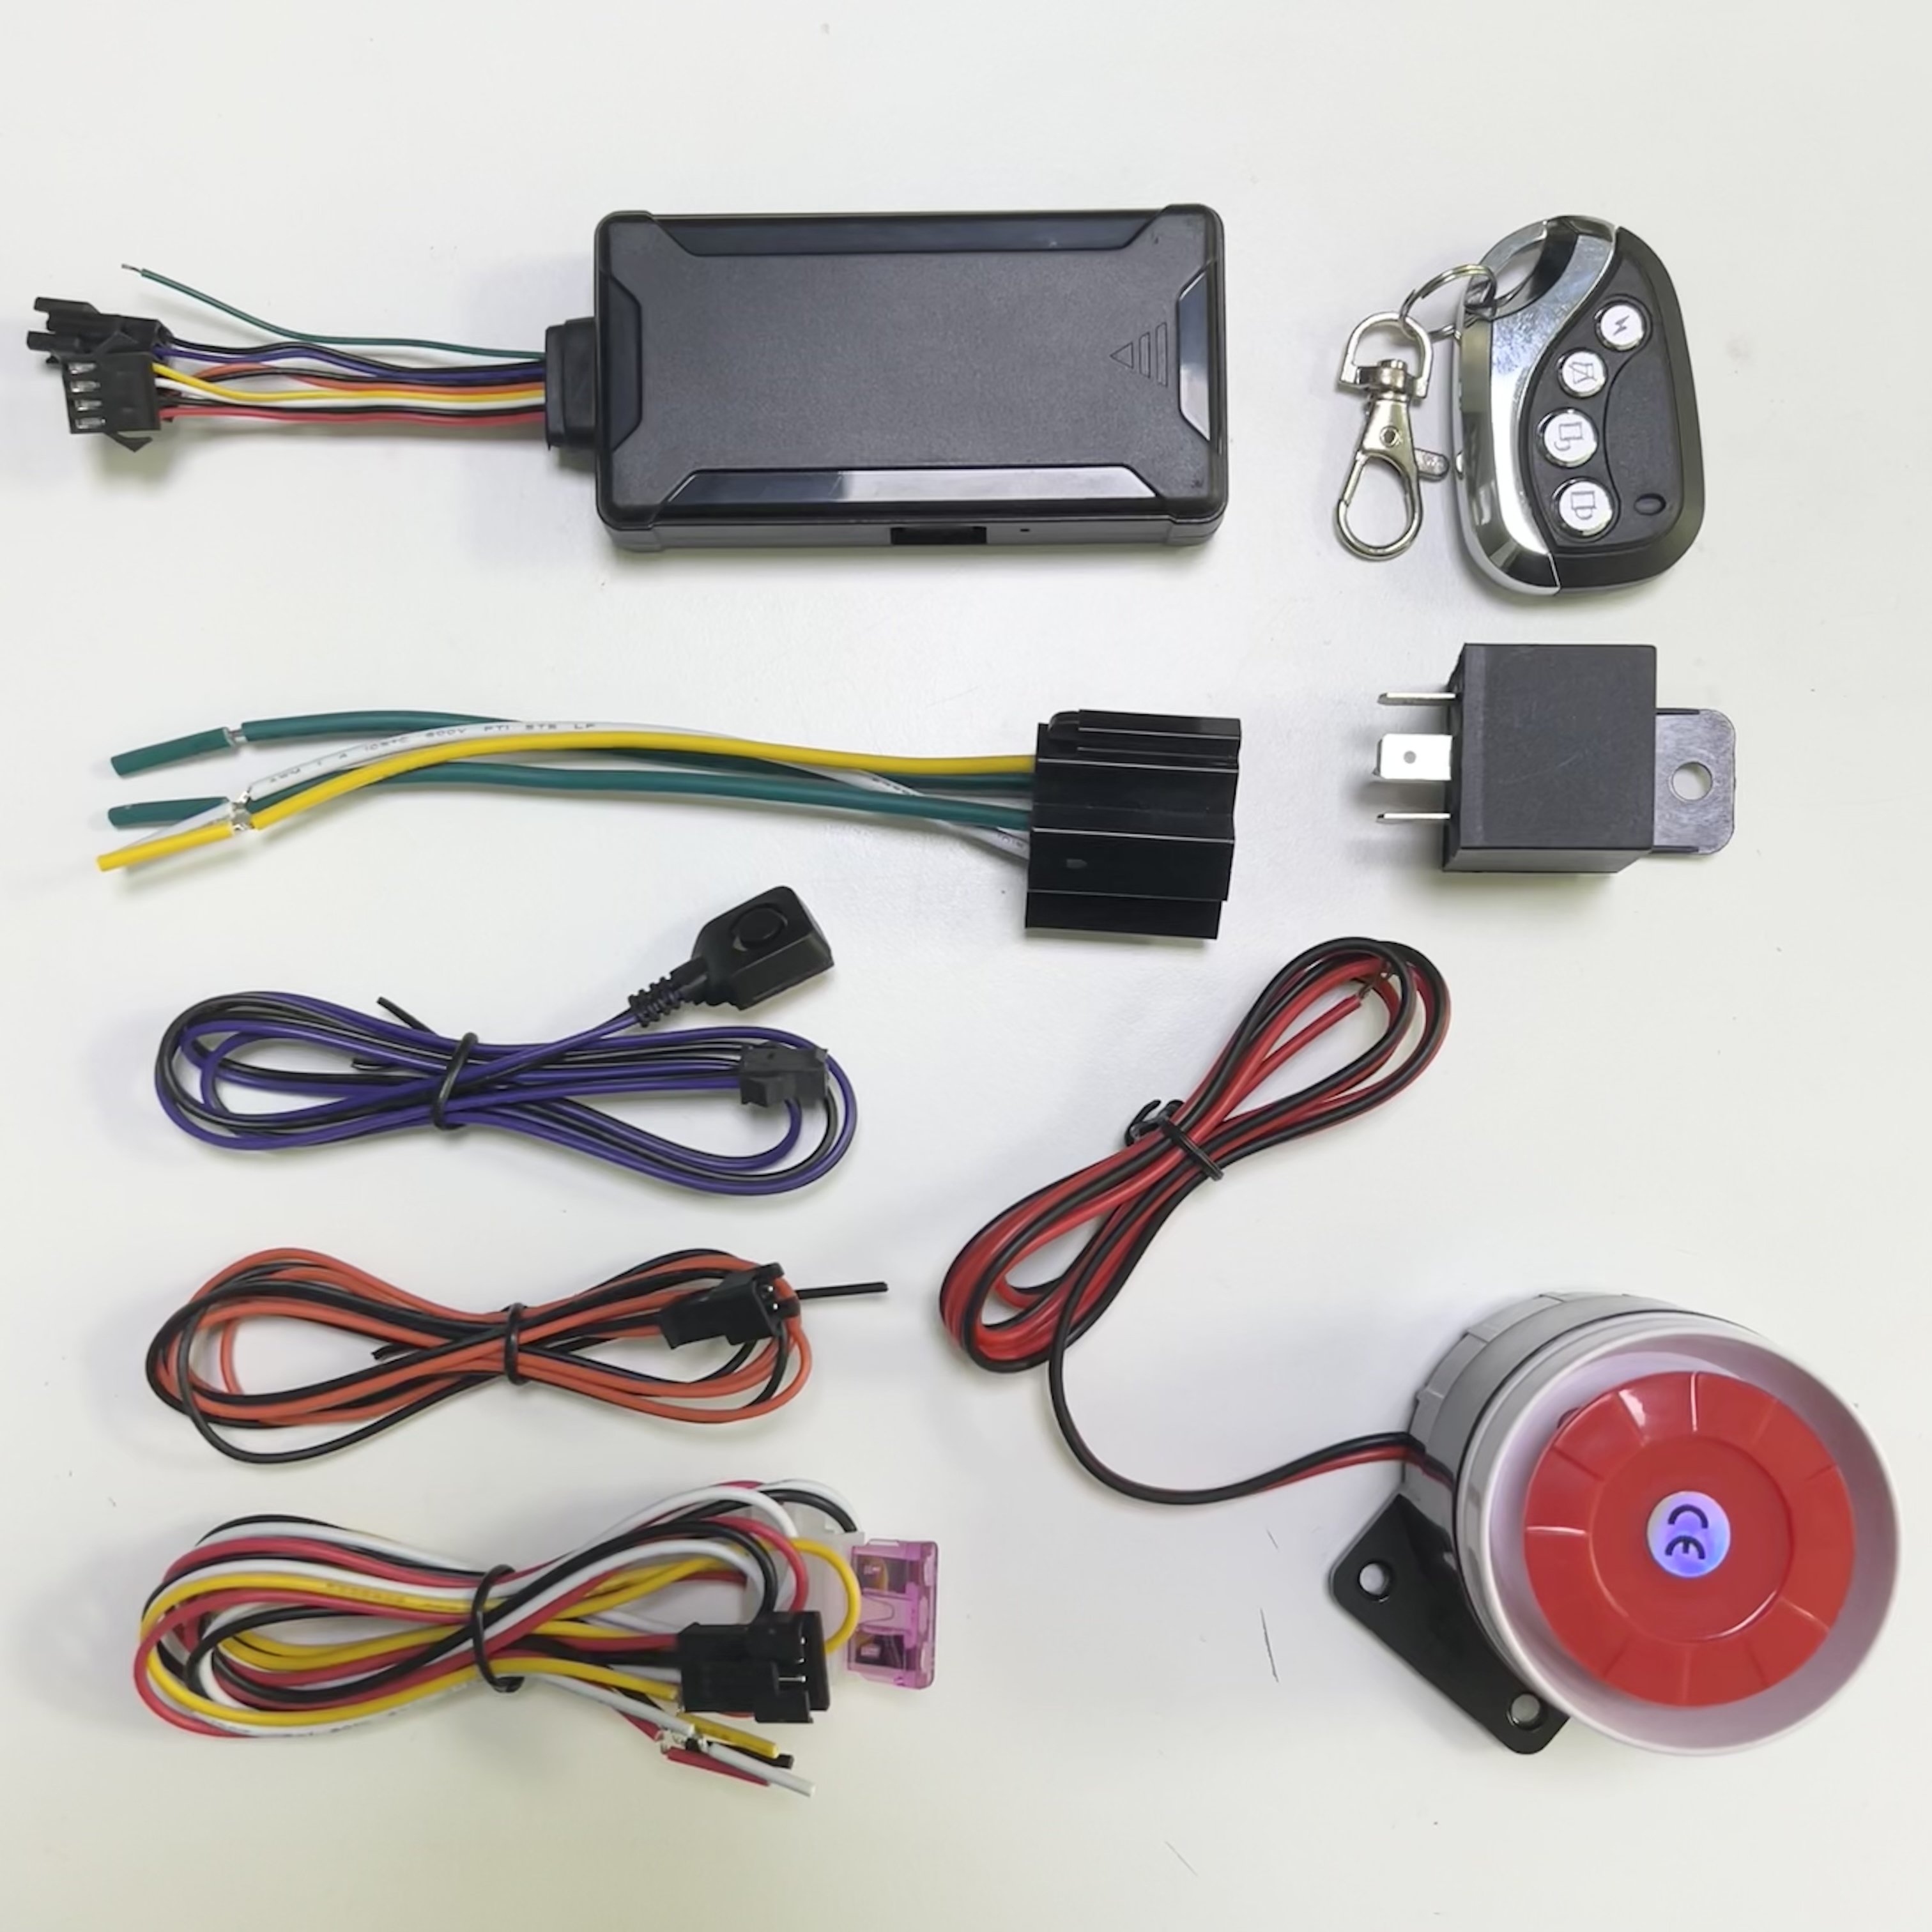 4G GPS Tracker for vehicles Processing